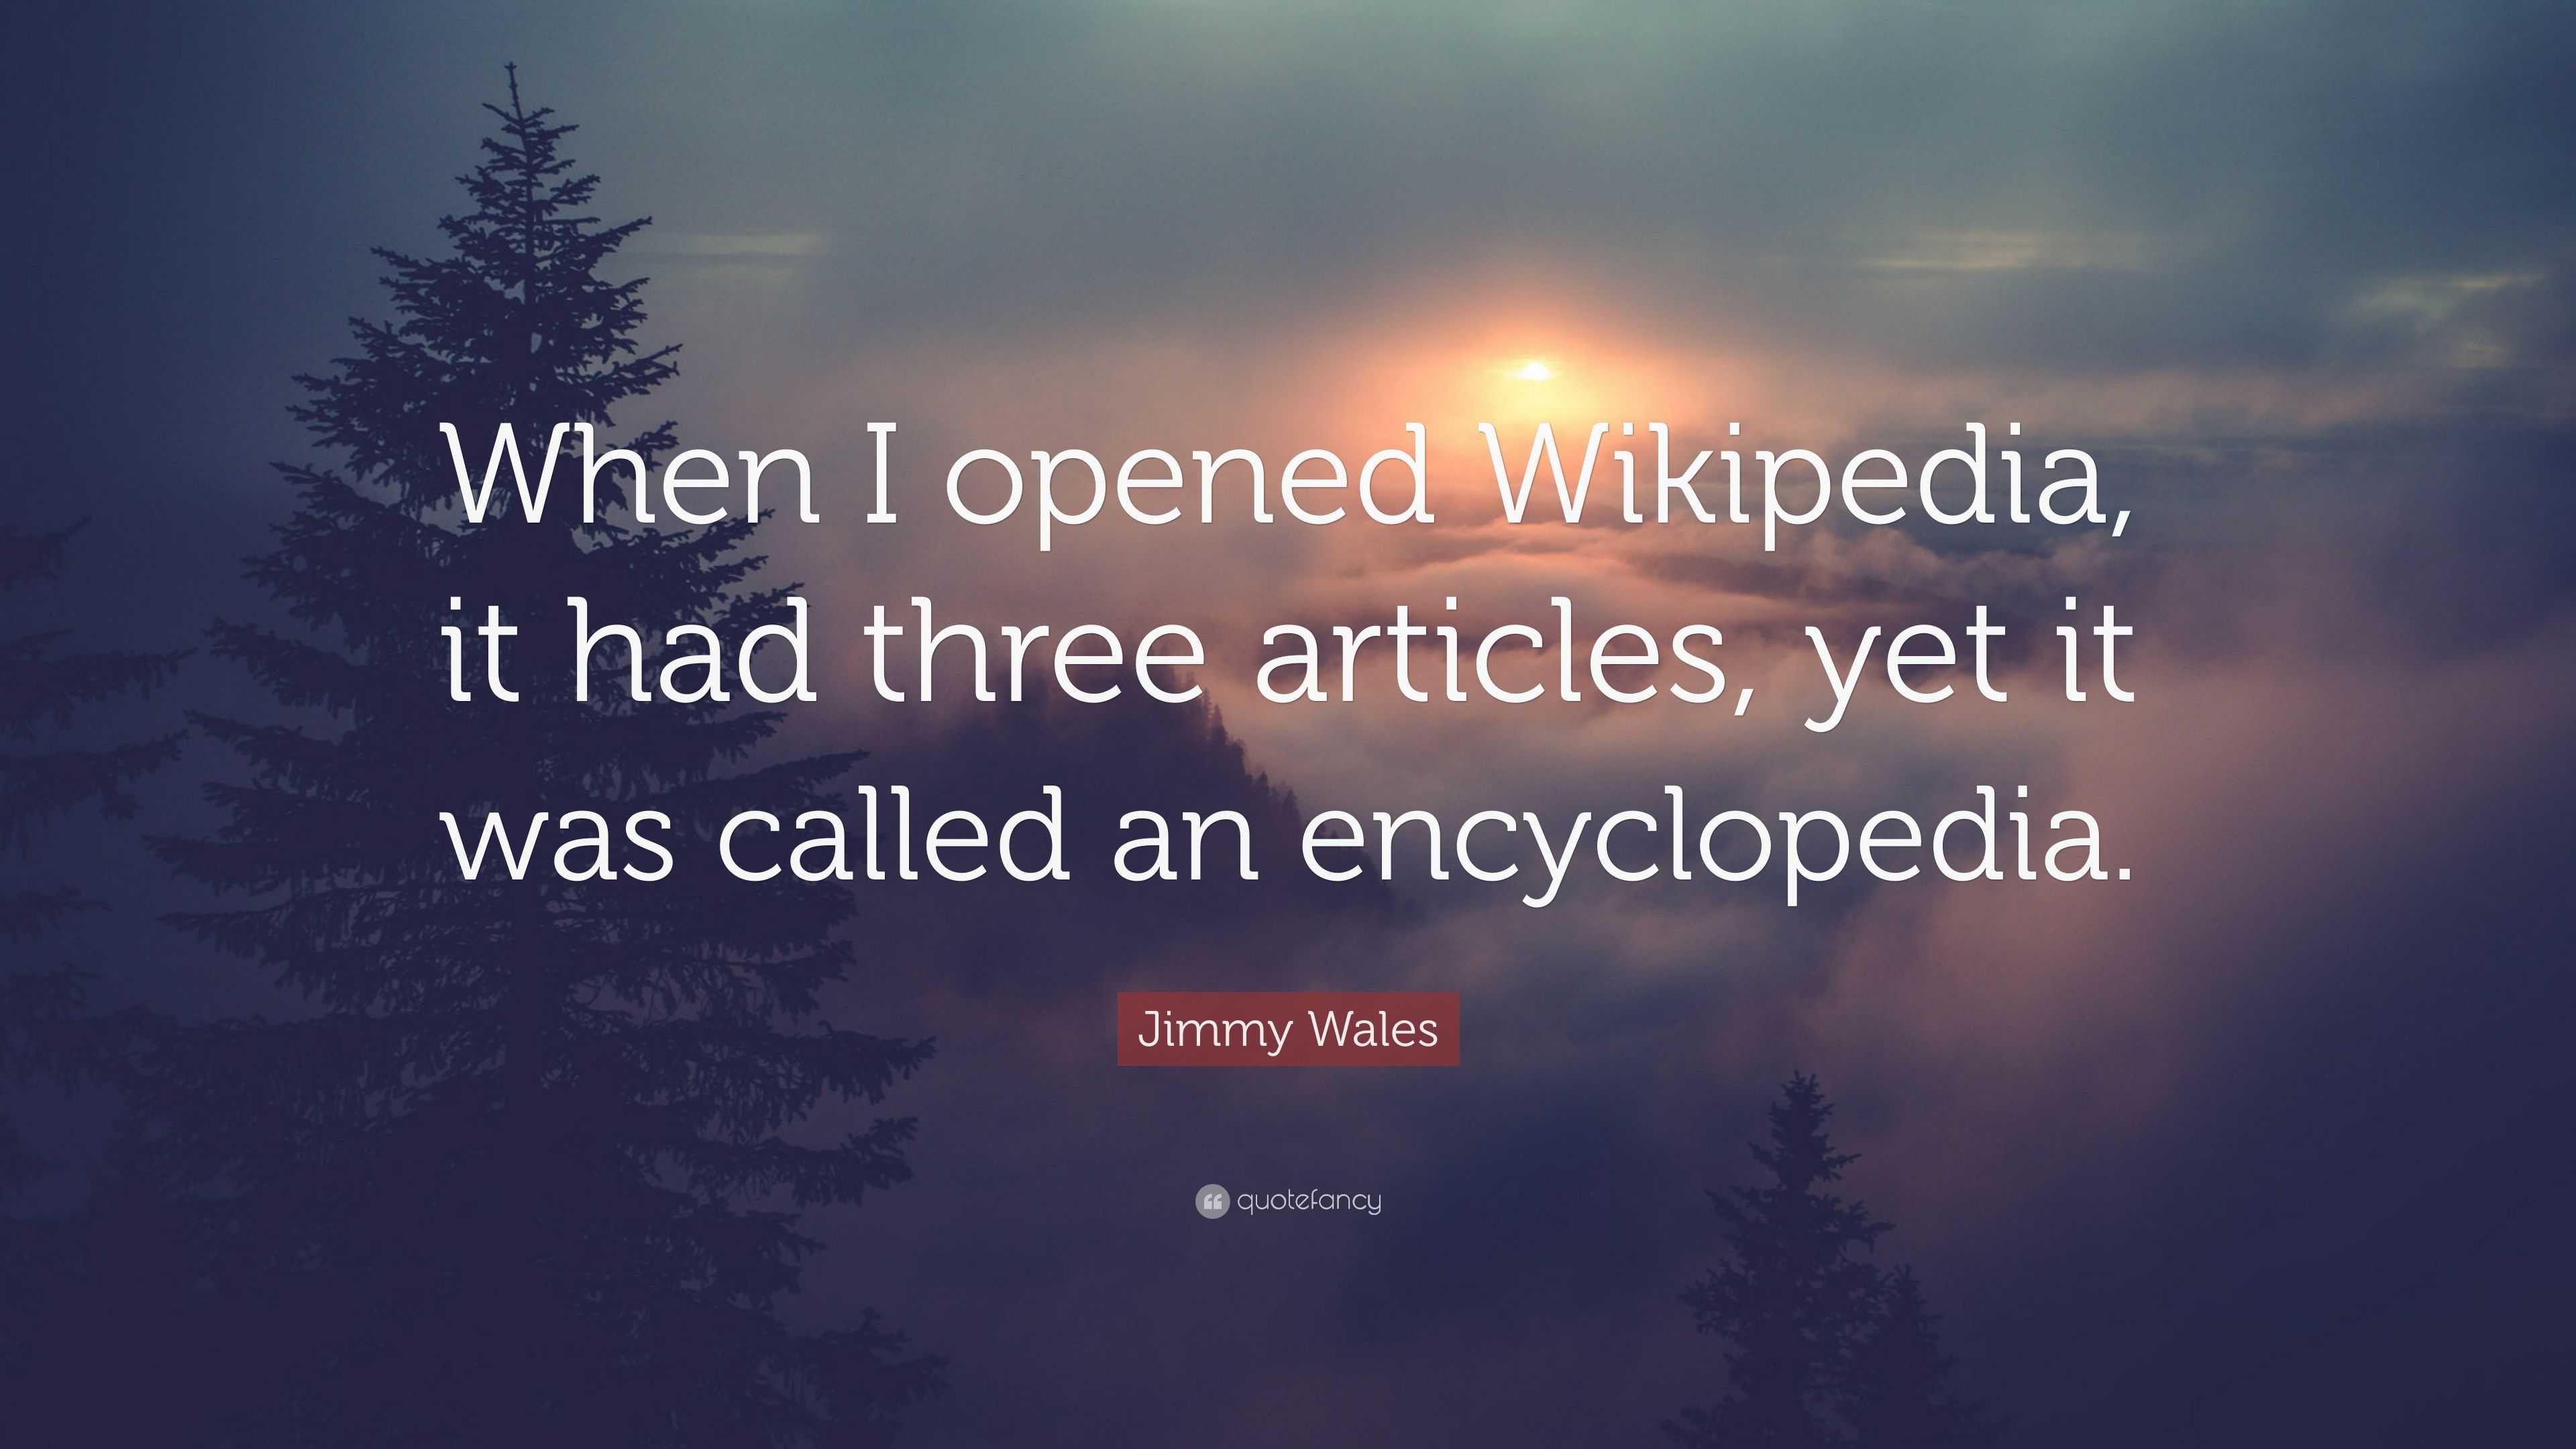 Jimmy Wales Quote: “When I opened Wikipedia, it had three articles, yet